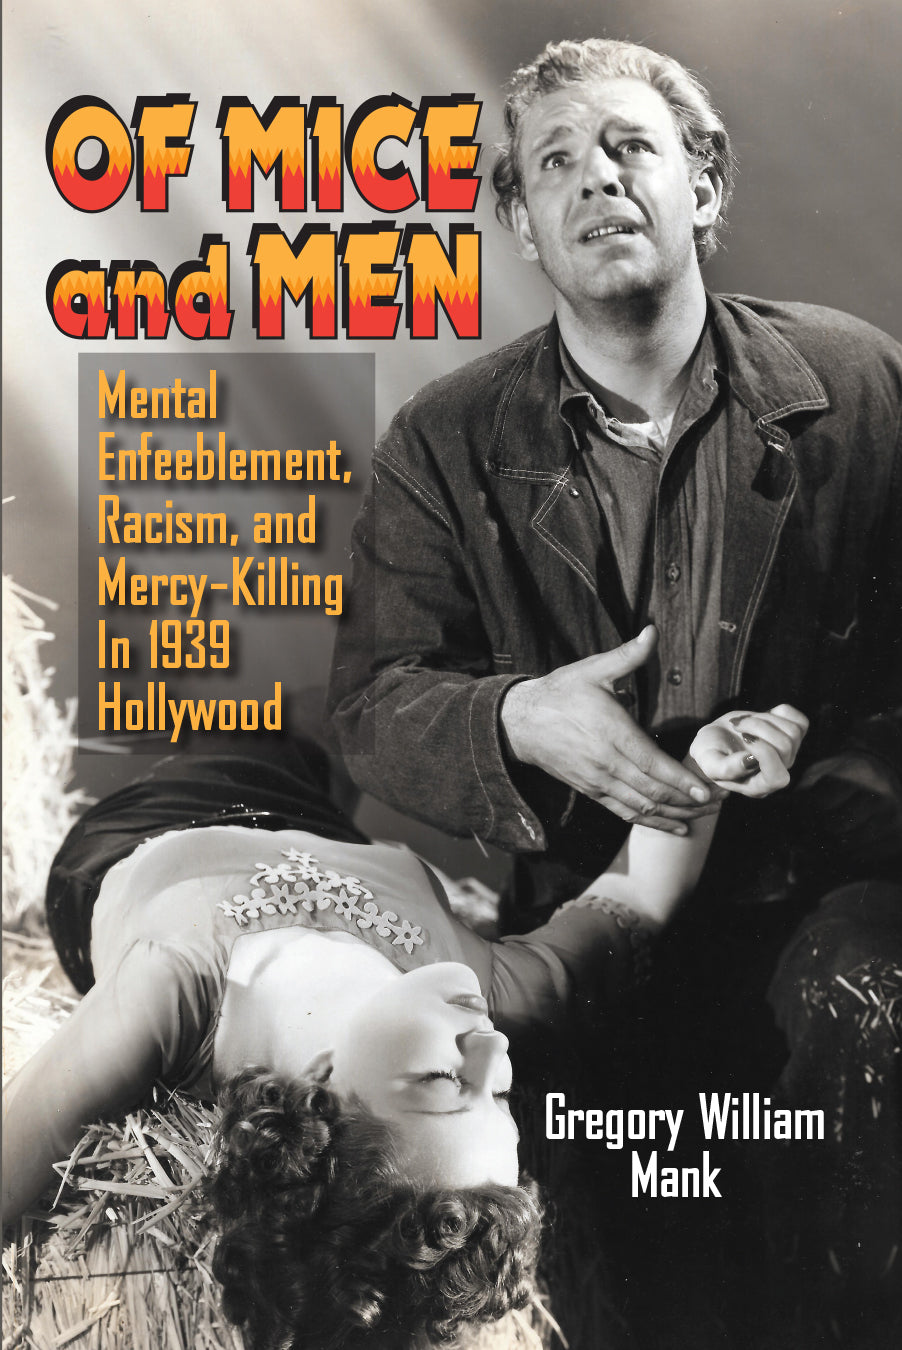 Of Mice and Men: Mental Enfeeblement, Racism, and Mercy-Killing In 1939 Hollywood (hardback)